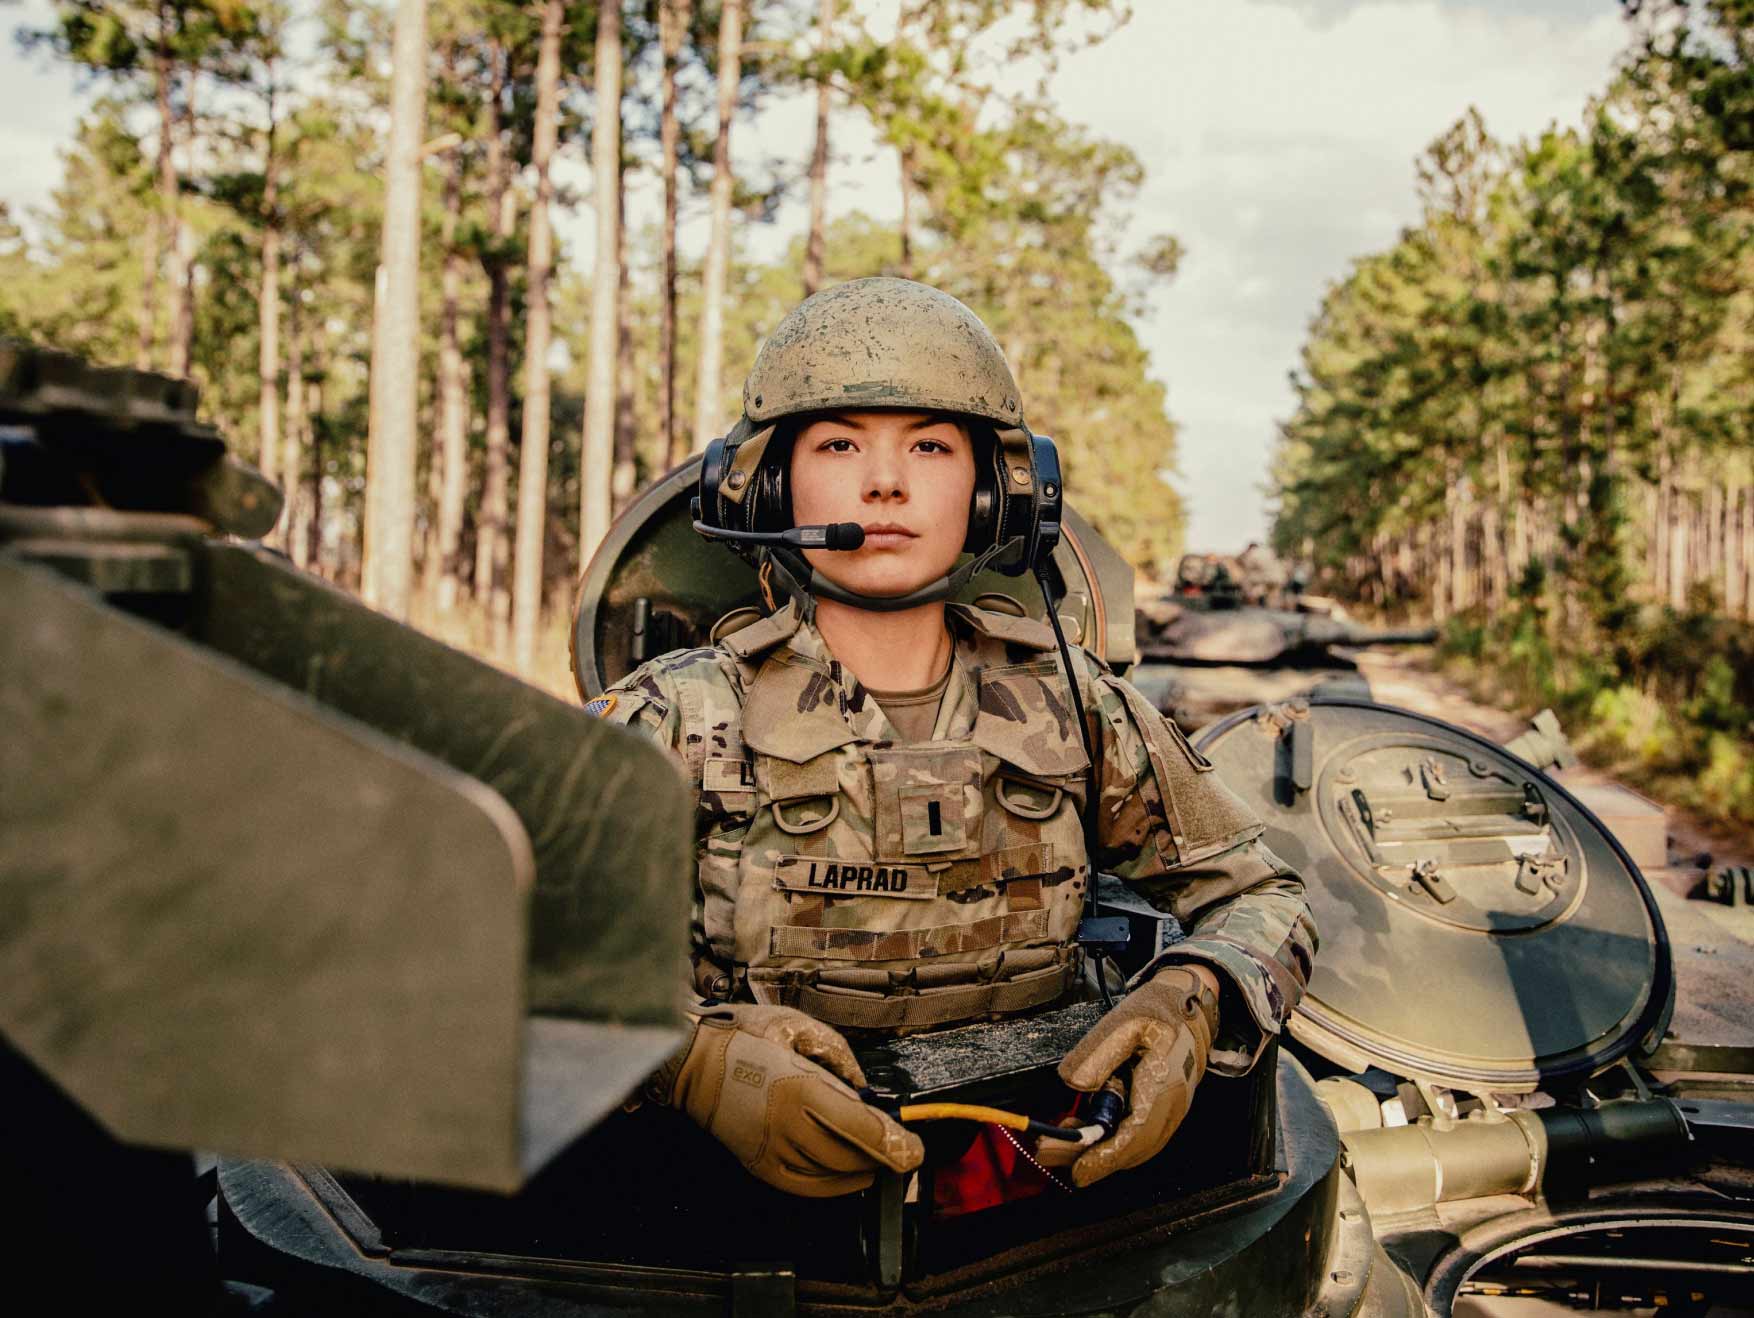 A female armor officer sitting aboard a tank